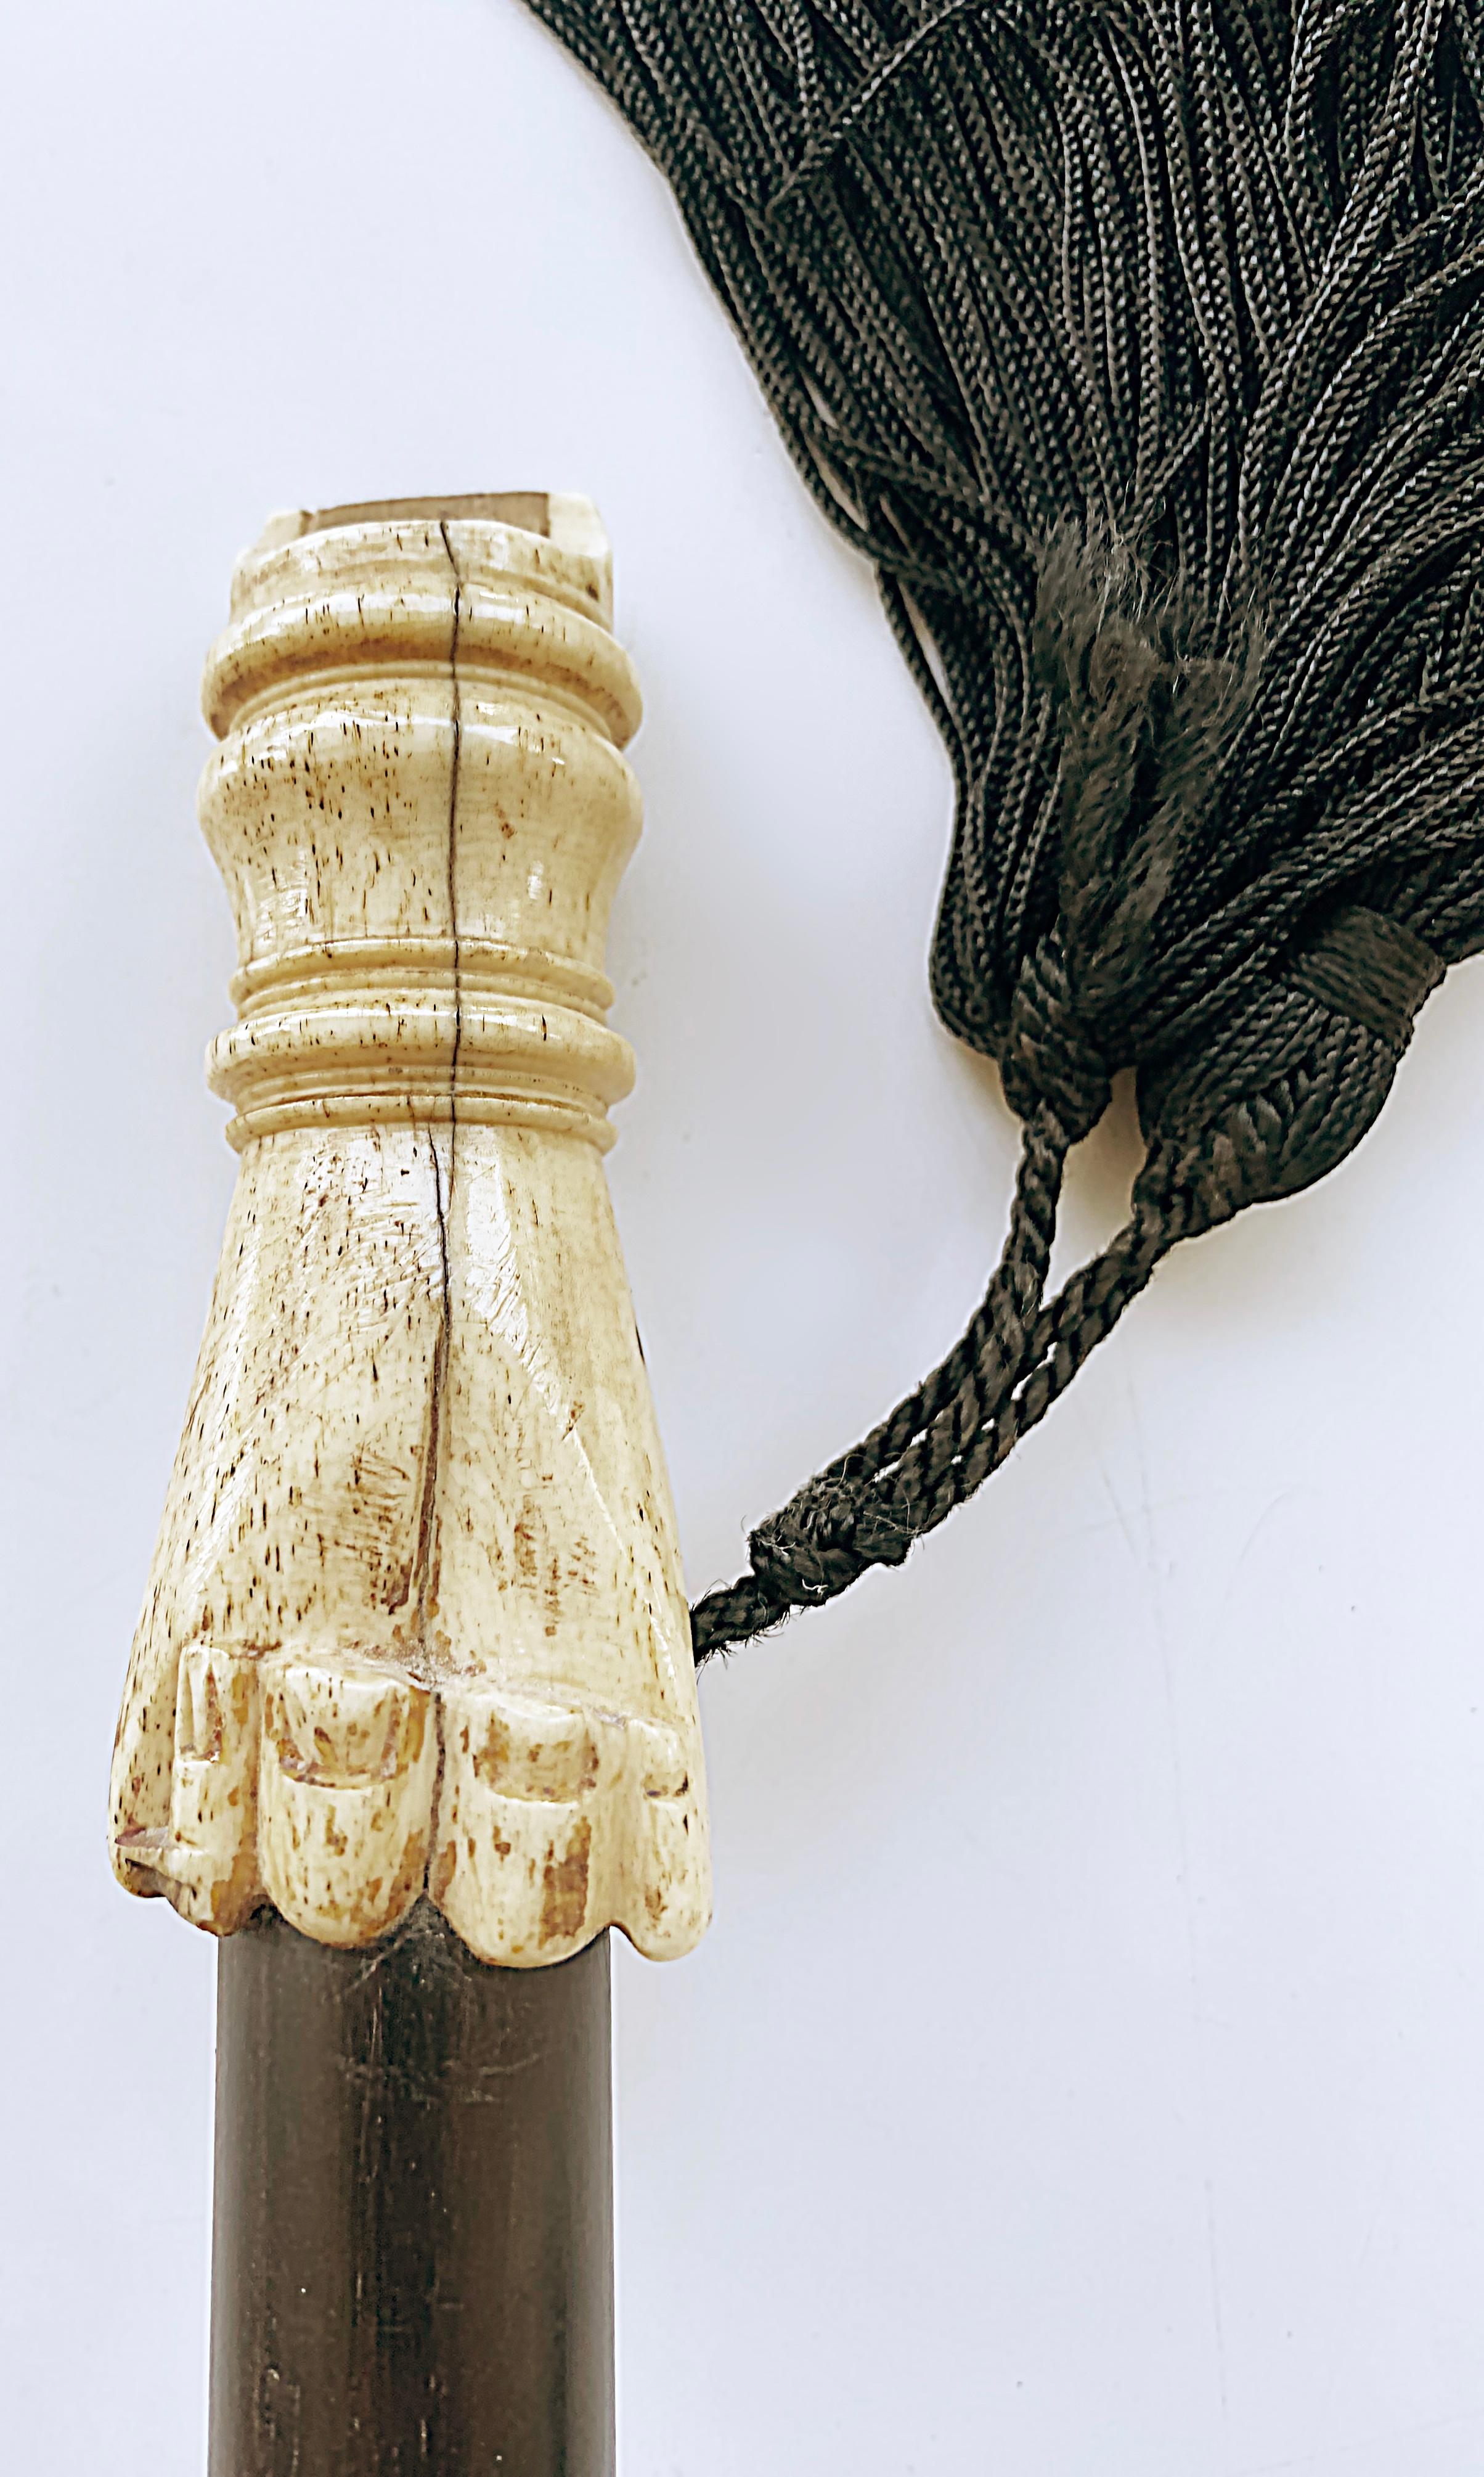 Antique Carved Bone Hand Whistle Walking Stick Cane.

Offered for sale is an antique bone-handled walking stick that has a carved hand for the handle that is a whistle. The carved hand sits atop an ebonized wood stick. The tip end of the stick is